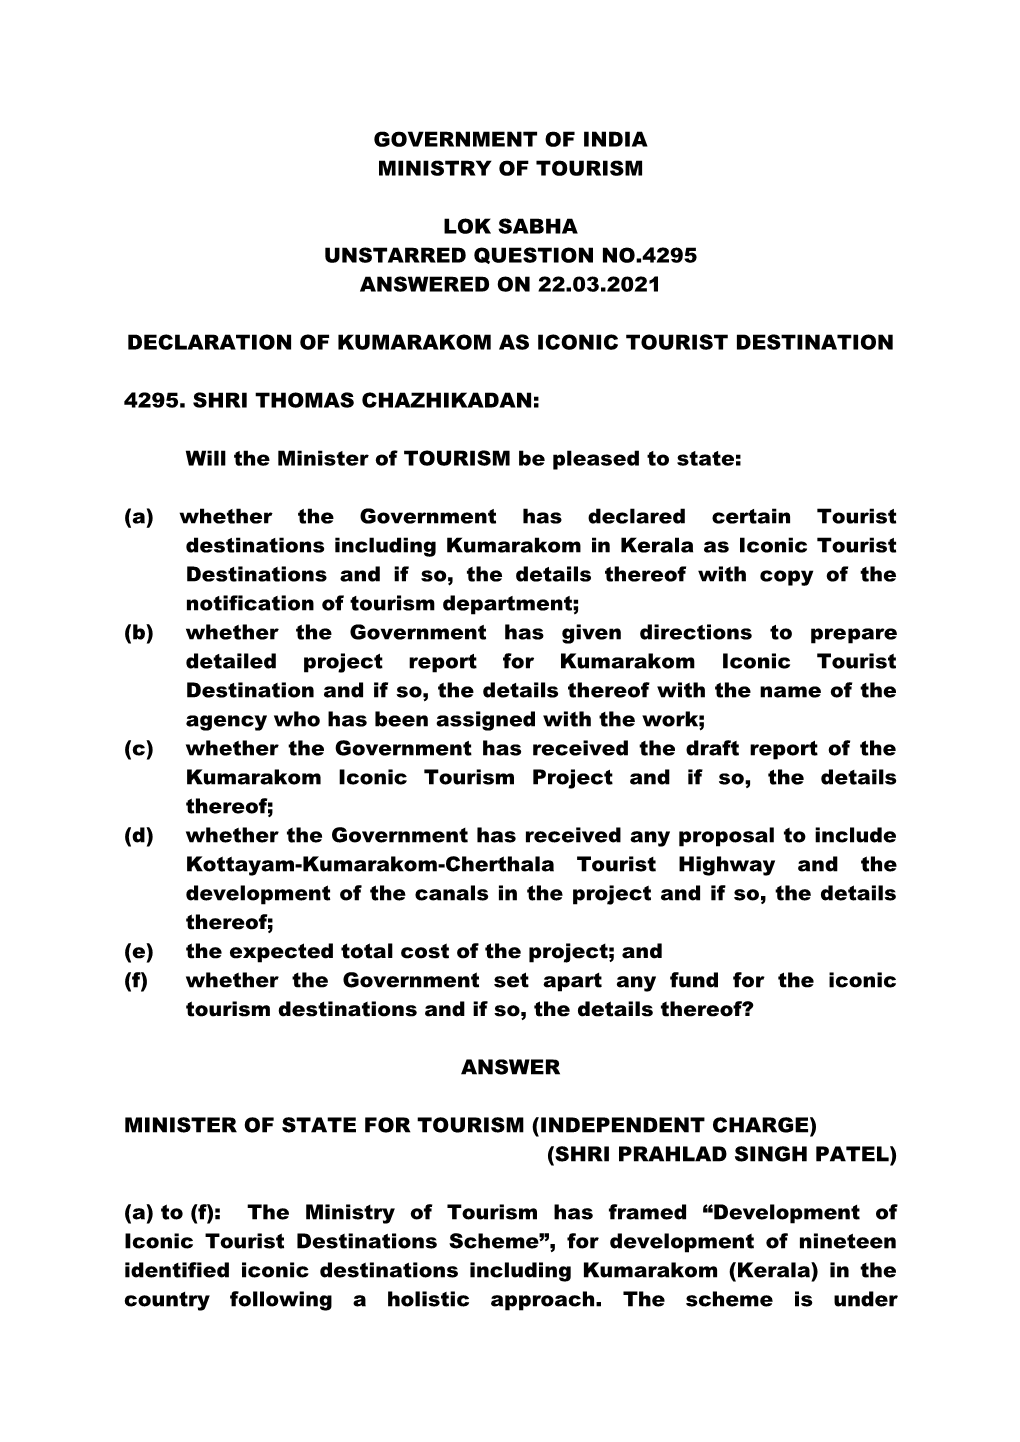 Government of India Ministry of Tourism Lok Sabha